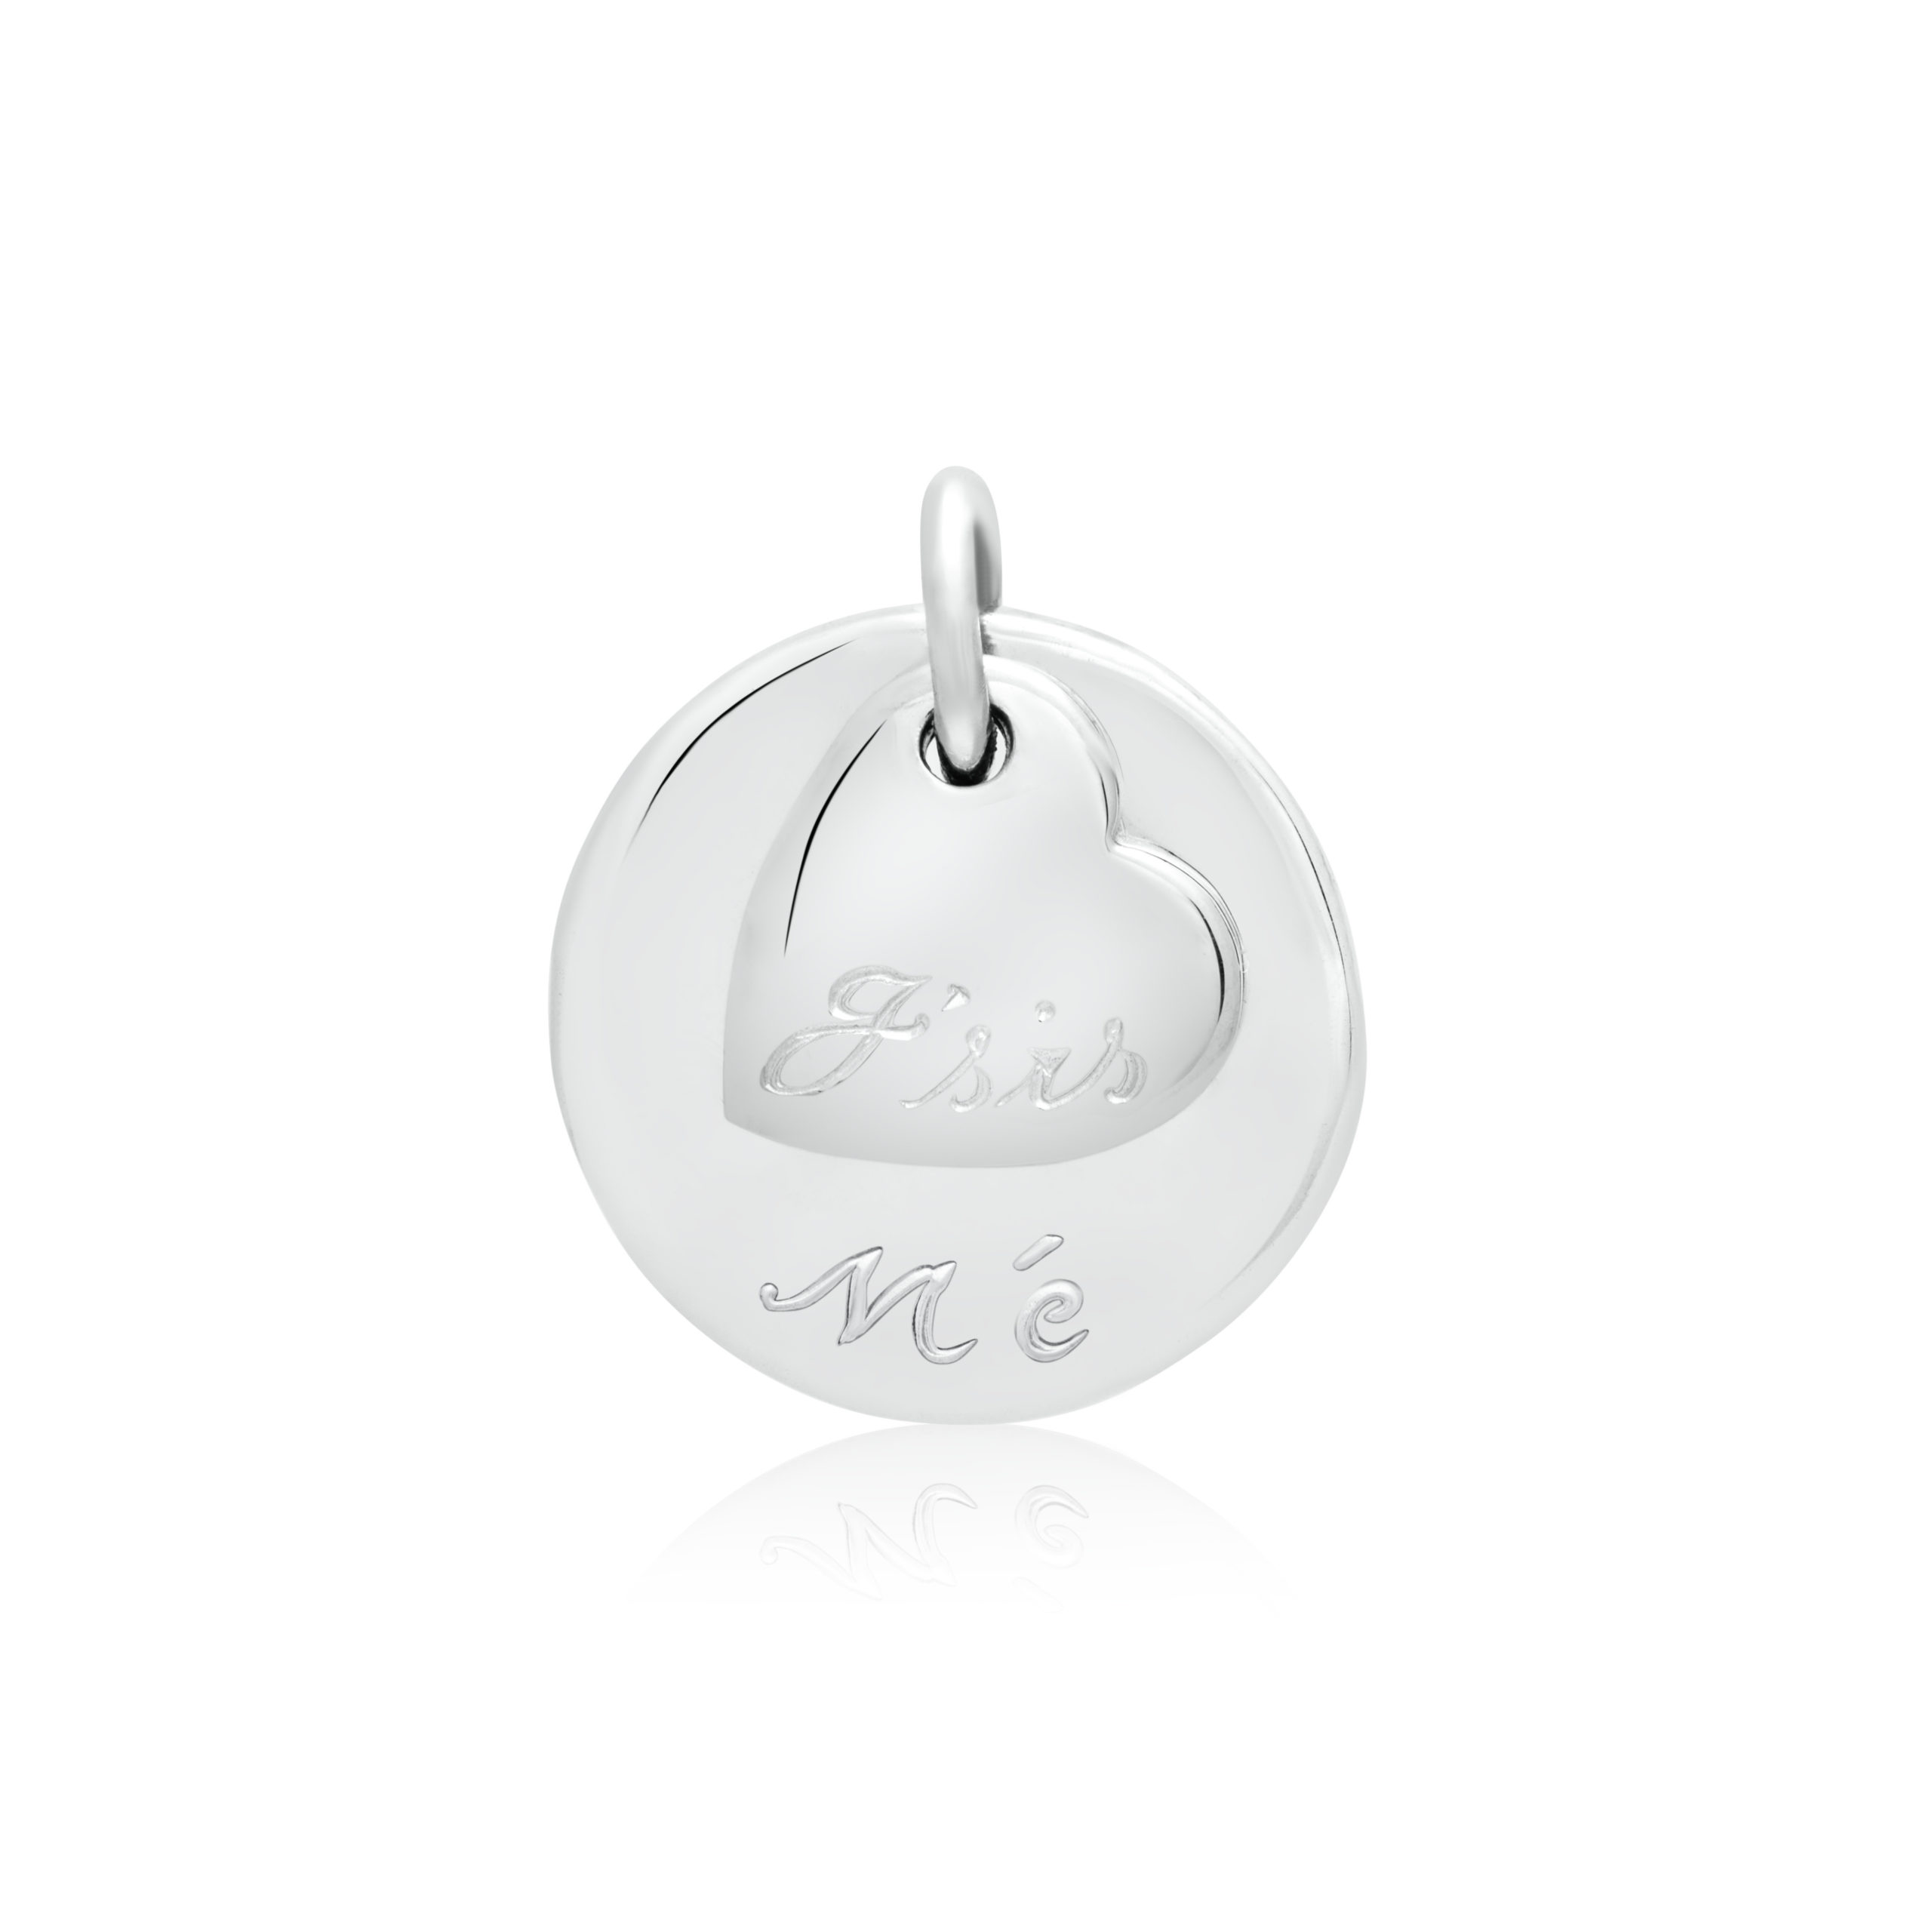 I Am Me Sterling Silver Charm / Pendant